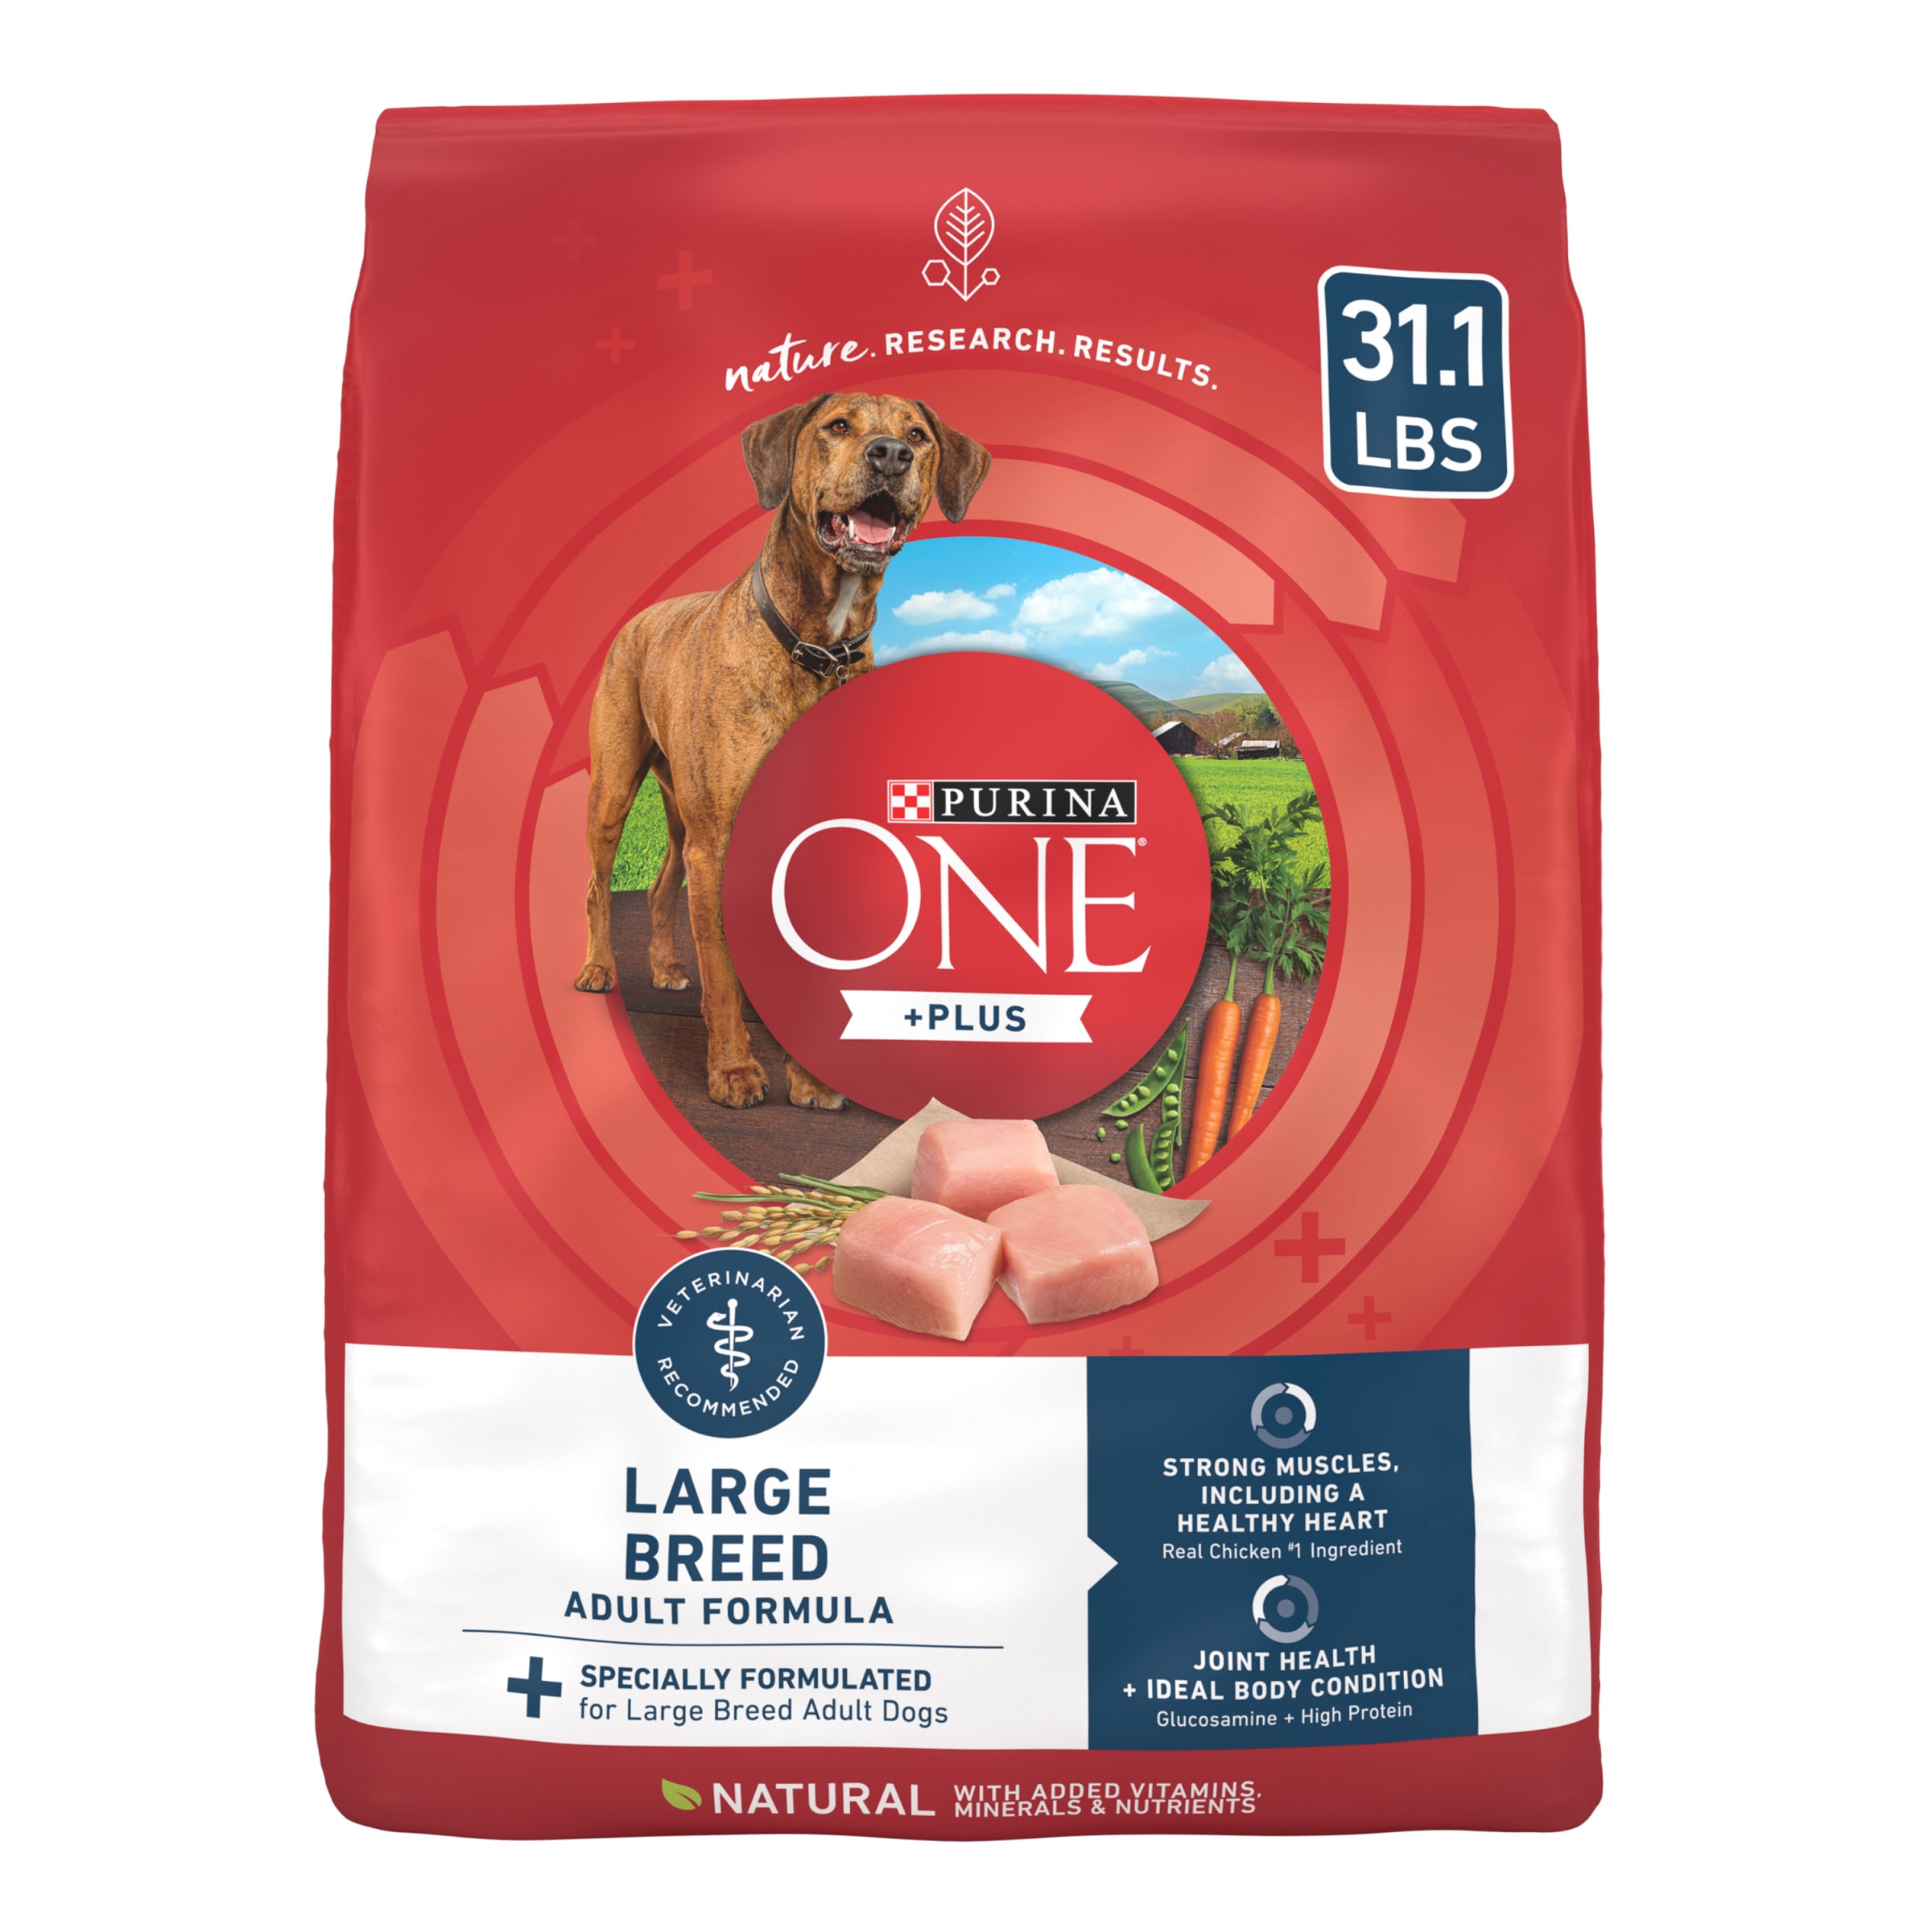 Purina One +Plus Dry Dog Food for Large  Adult Dogs High Protein, Real Chicken, 31.1 lb Bag - image 1 of 11